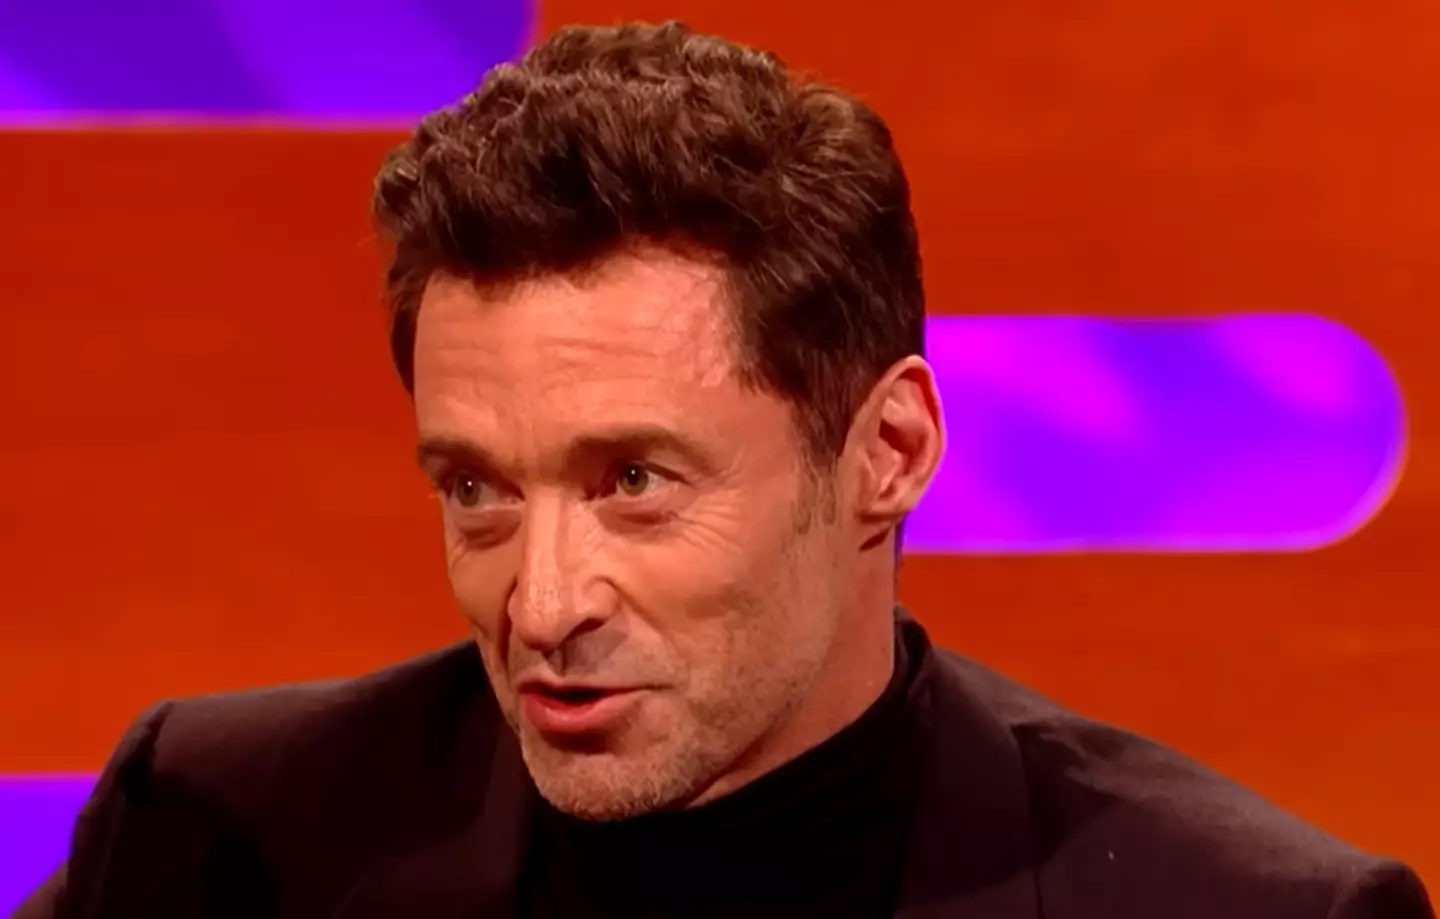 Hugh Jackman said he was one of about eight actors contacted about becoming Bond, including Daniel Craig.